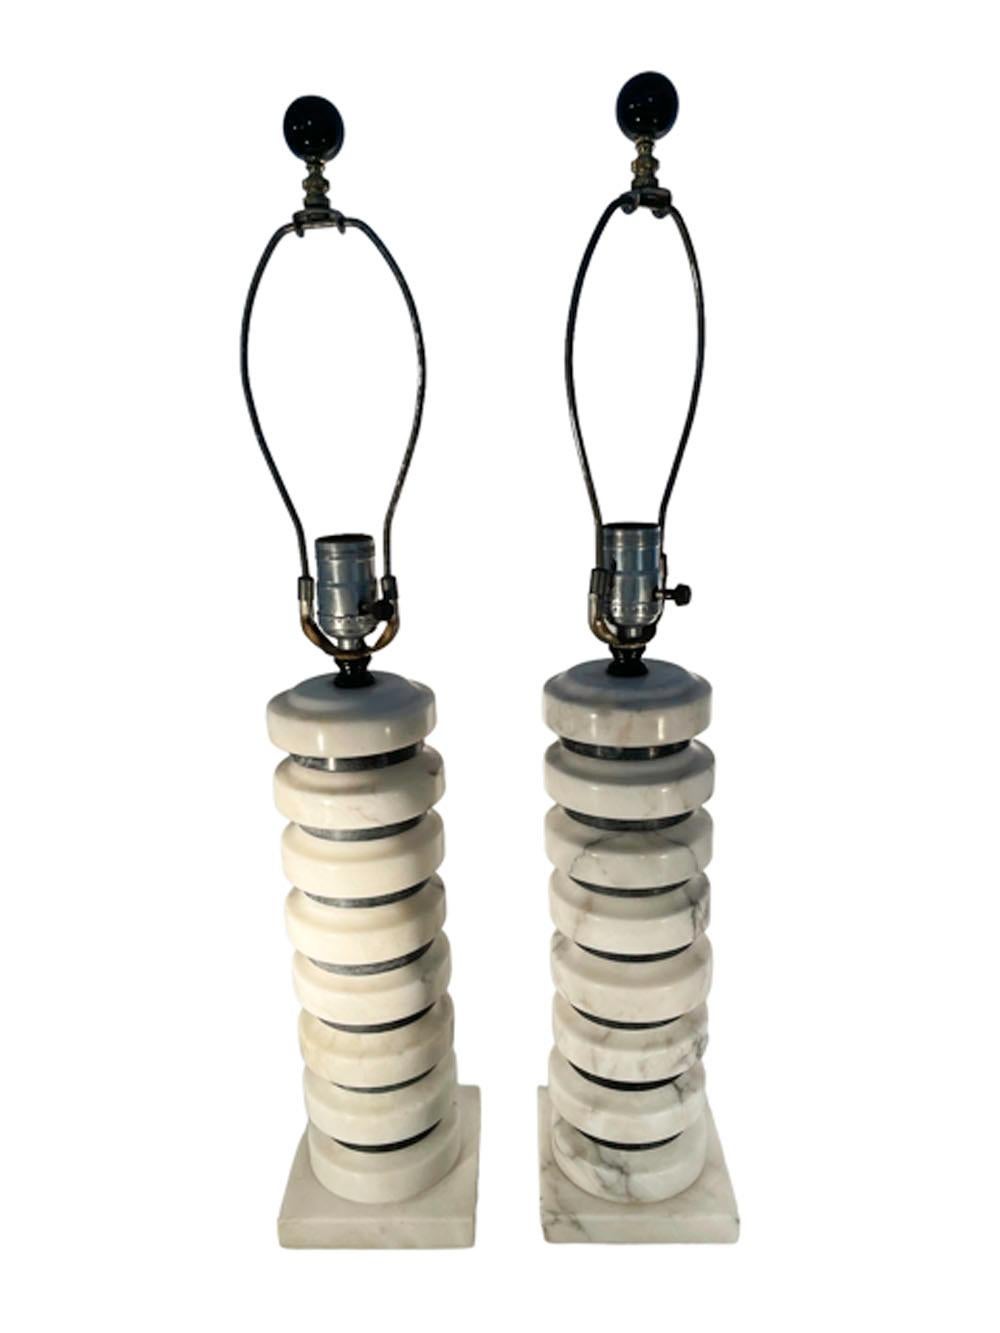 Pair of Mid-20th Century Italian alabaster table lamps of alternating gray and white disks on a square base. The smaller gray disks have a flat profile while the white disks have a shaped top edge. Newly re-wired.
Measures: Base: 4.5